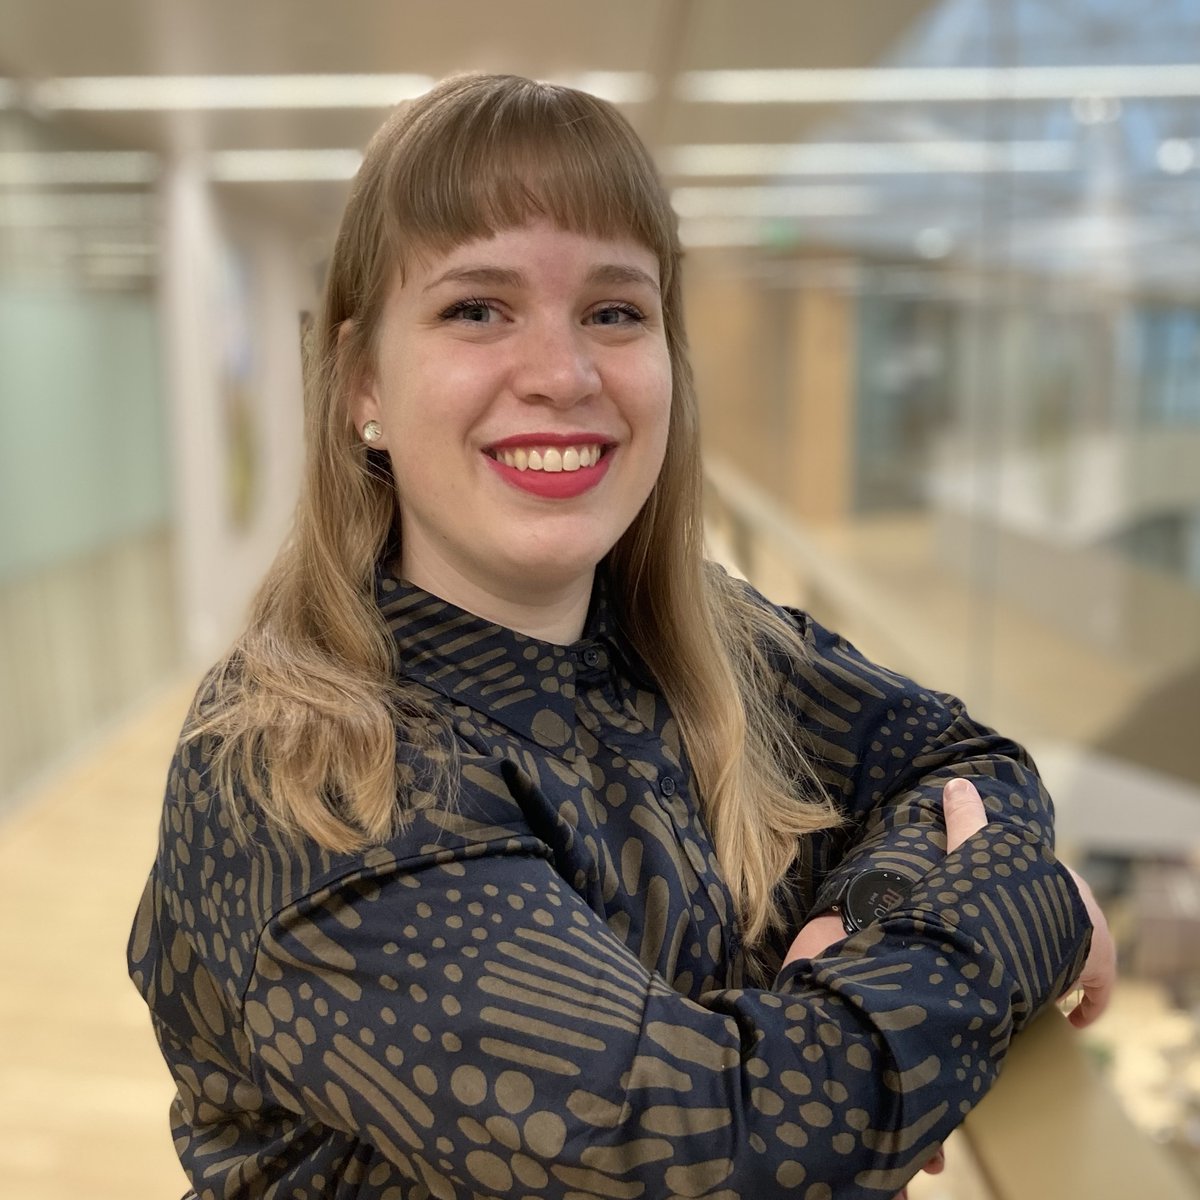 Next Friday, 15 March, Aino Kalmbach, will defend her doctoral dissertation “Essays in Economics of Education and Migration”. Read more: helsinkigse.fi/articles/essay… @AinoKalmbach @AaltoBIZ